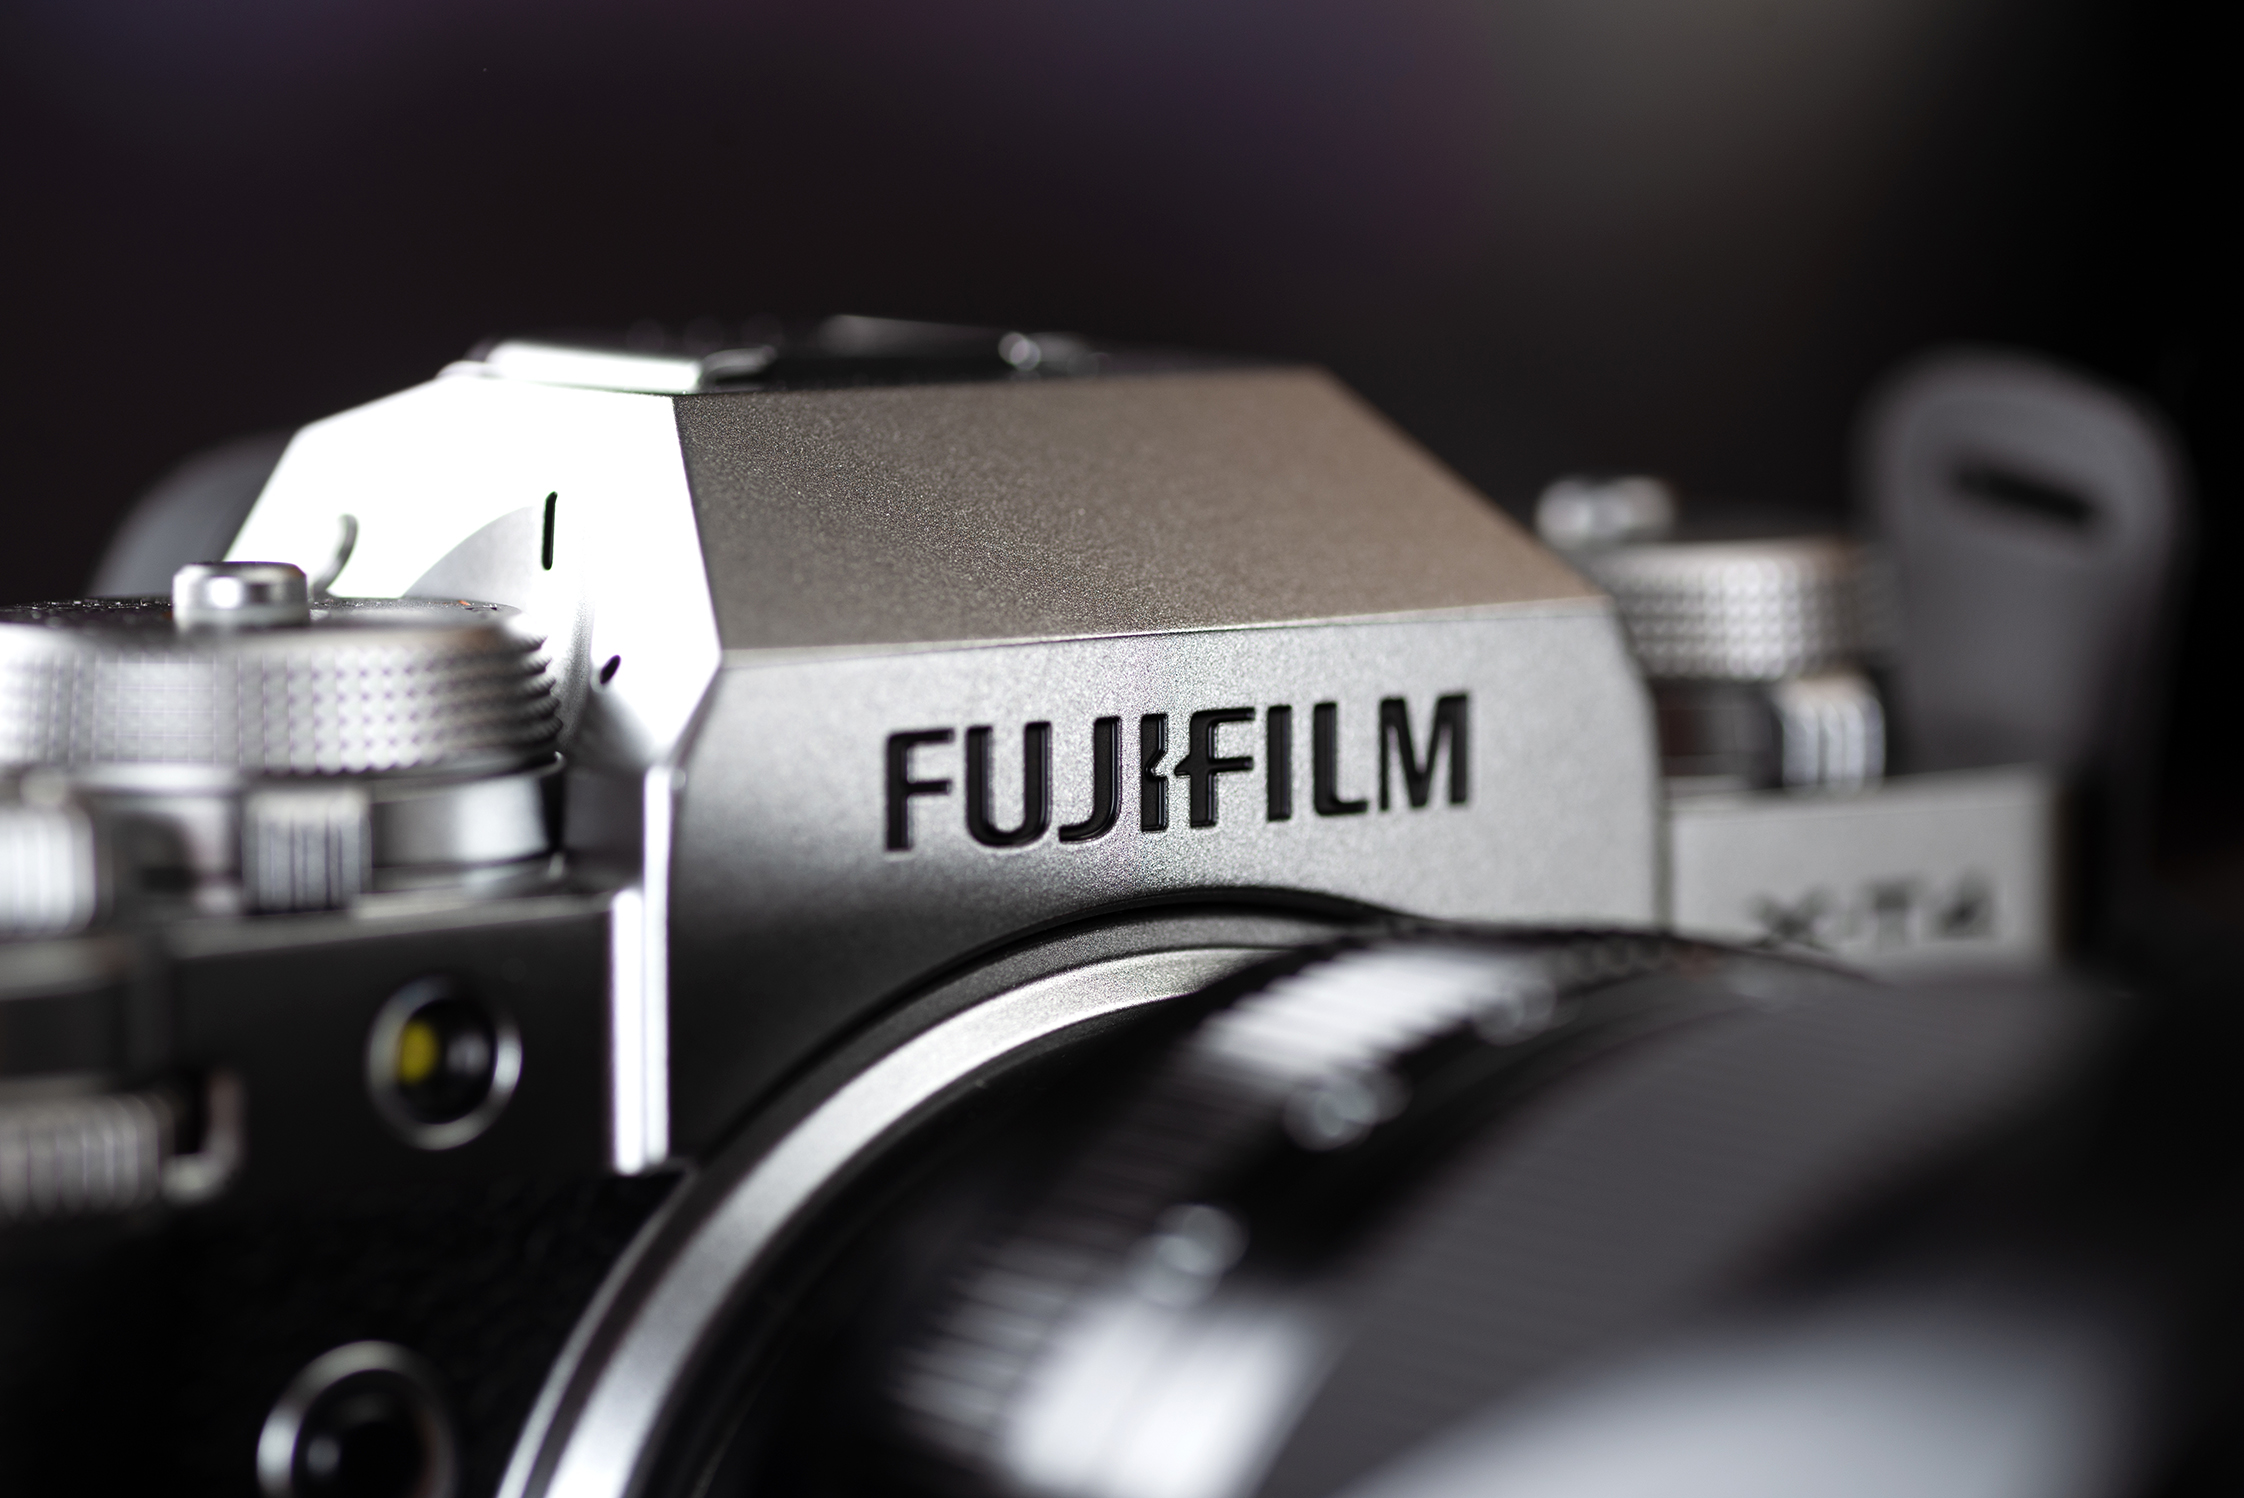 PTSG in the picture with FujiFilm